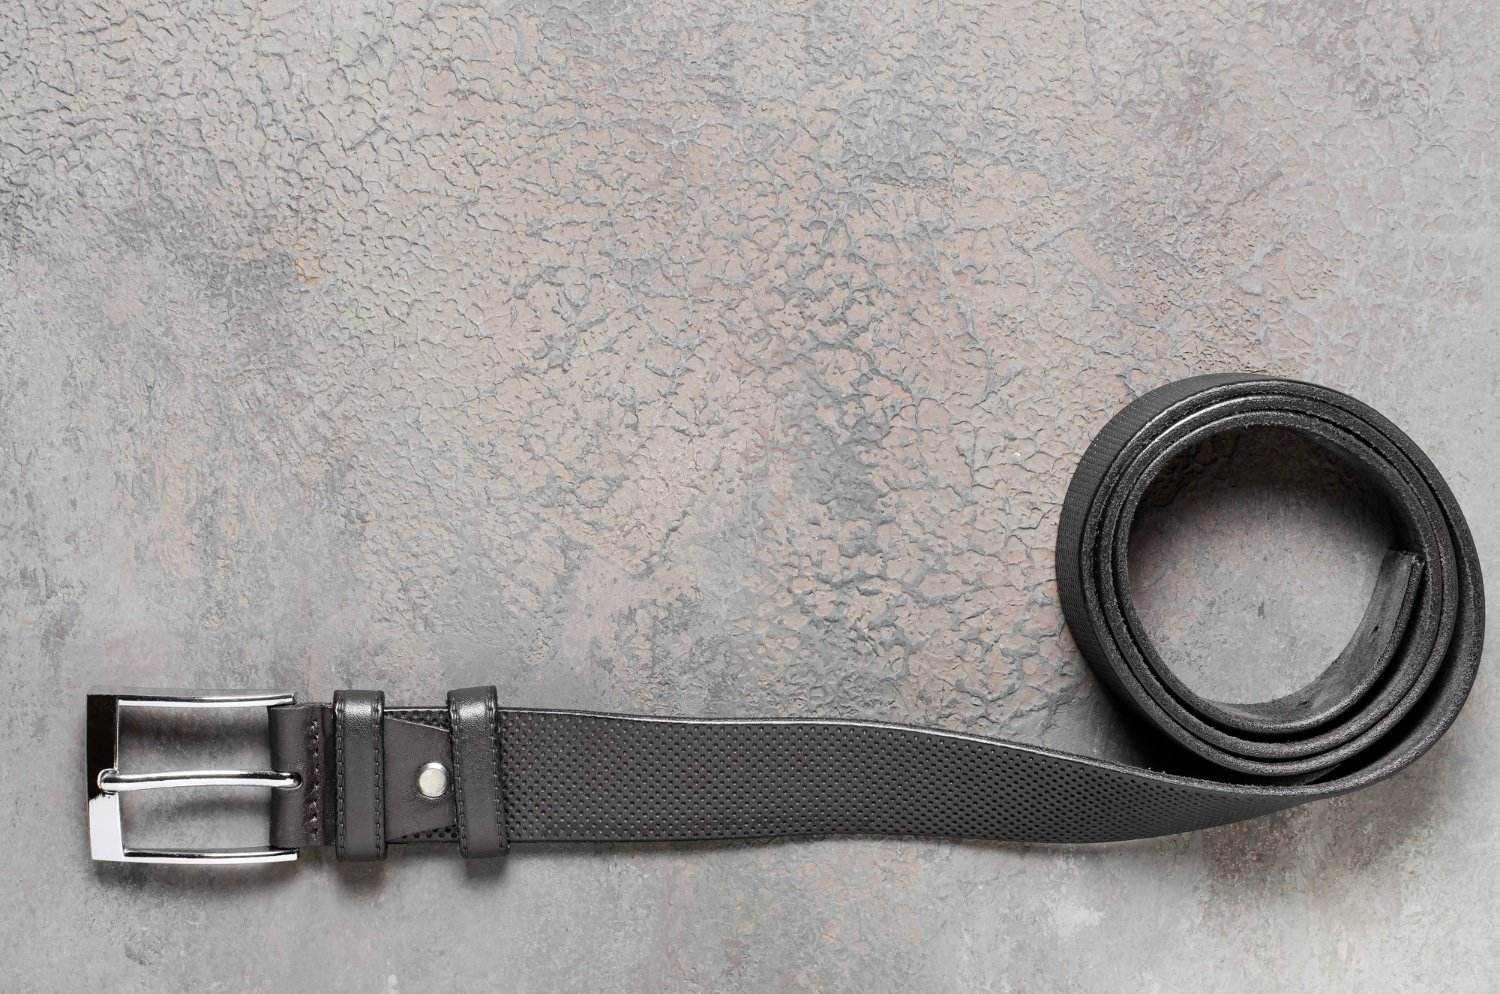 Buckle Up With Nexbelt’s Innovative No-Hole Belts For Perfect Fit